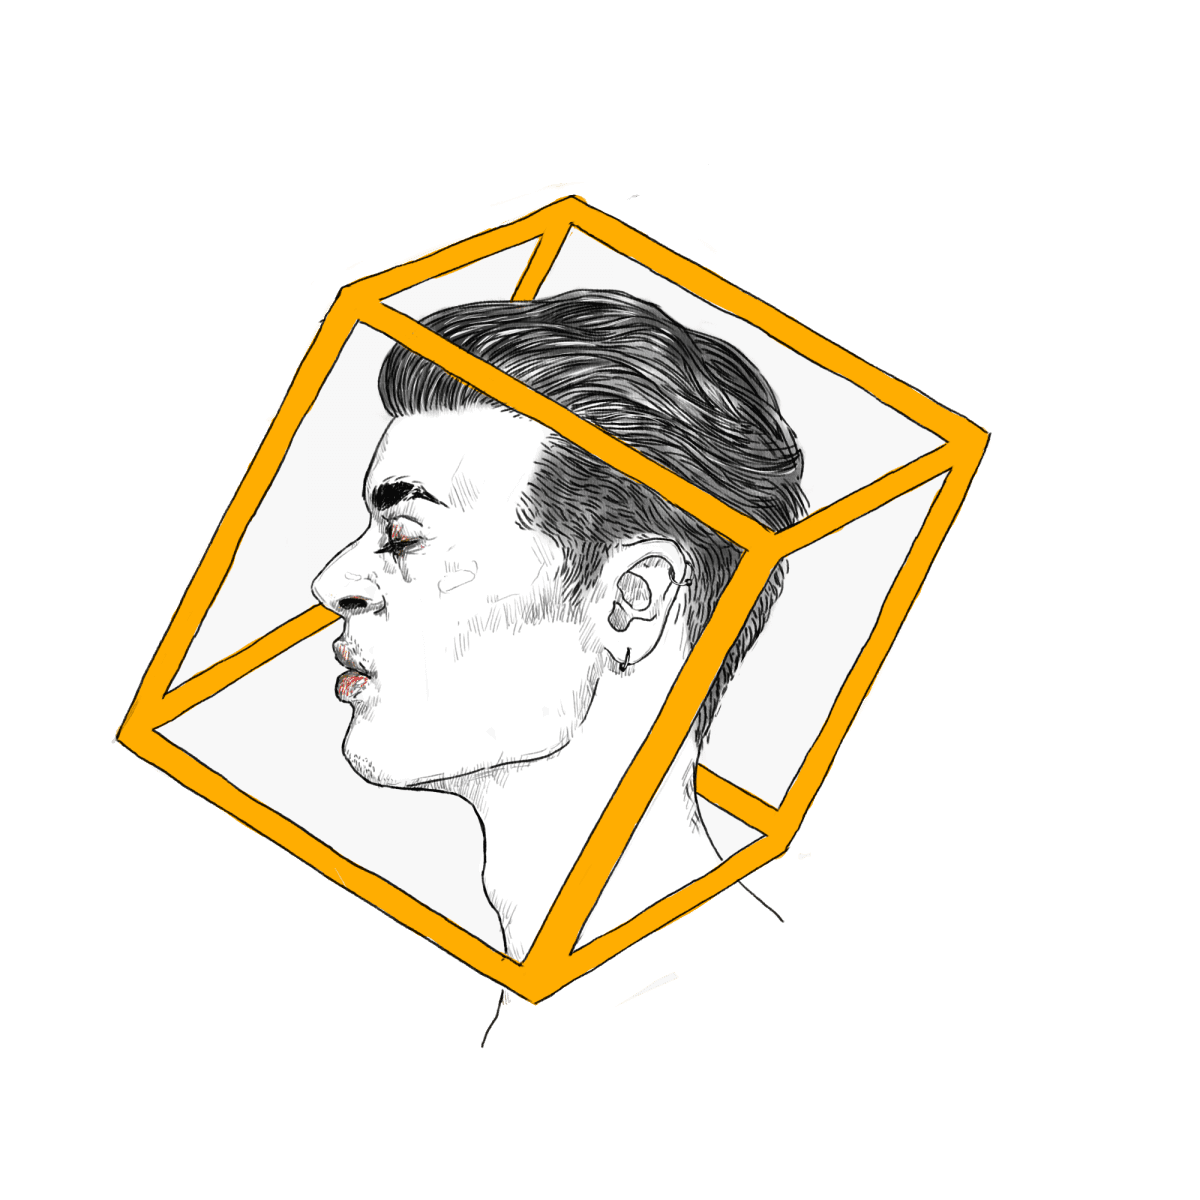 Drawing of a man surrounded by a yellow box.